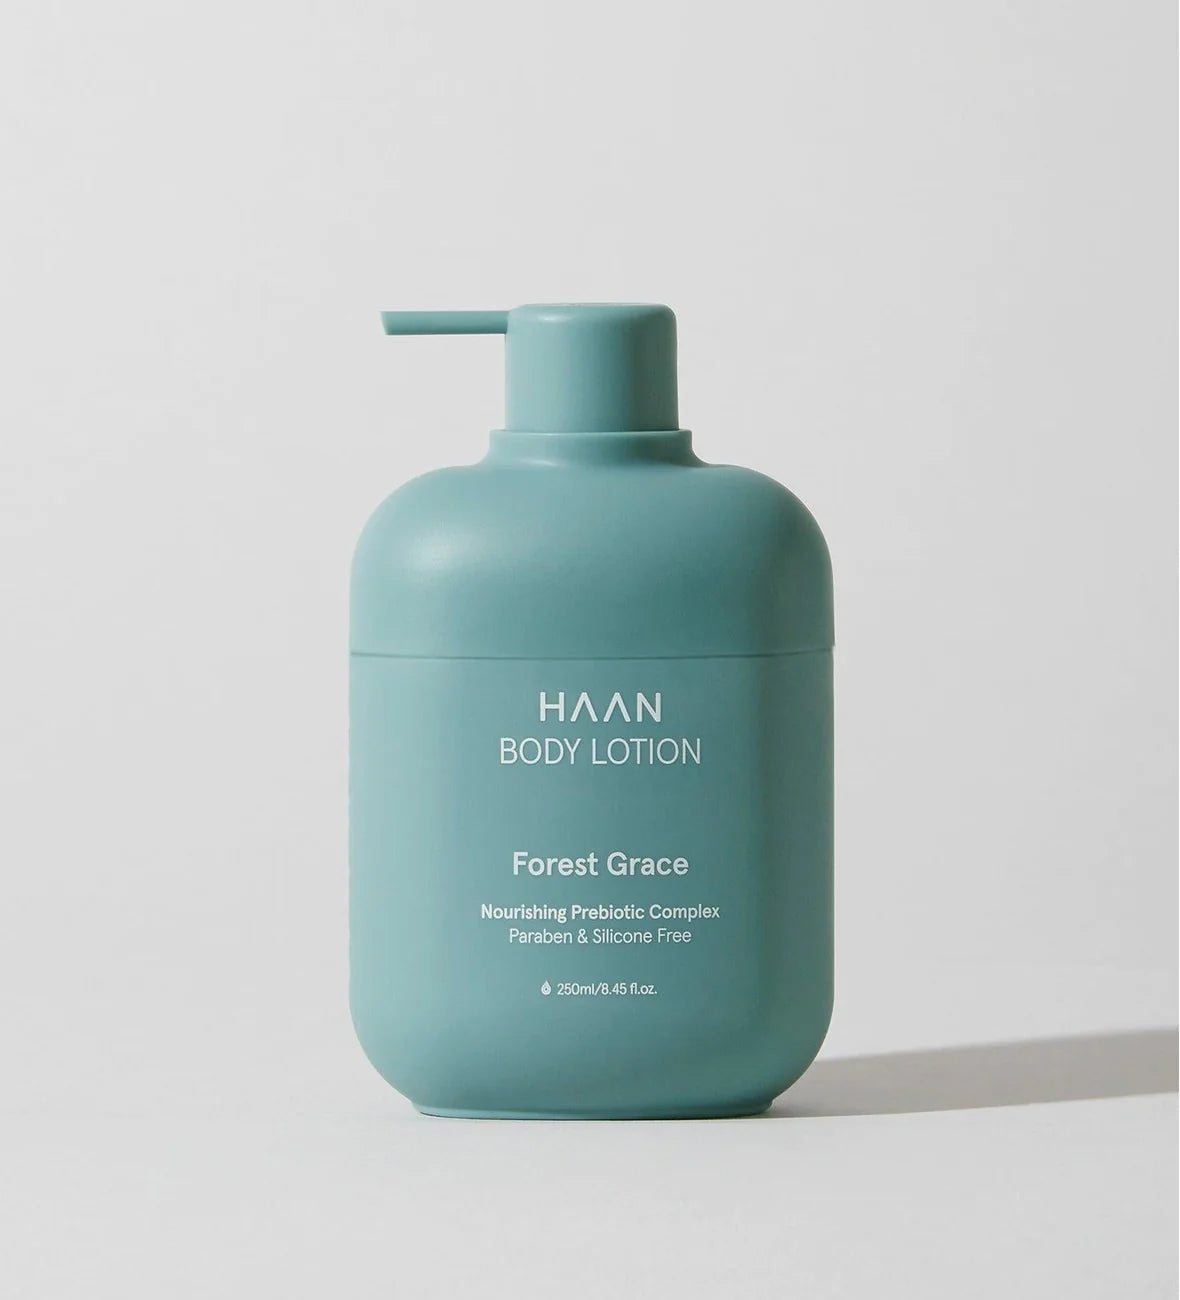 HAAN BODY LOTION | Forest Grace